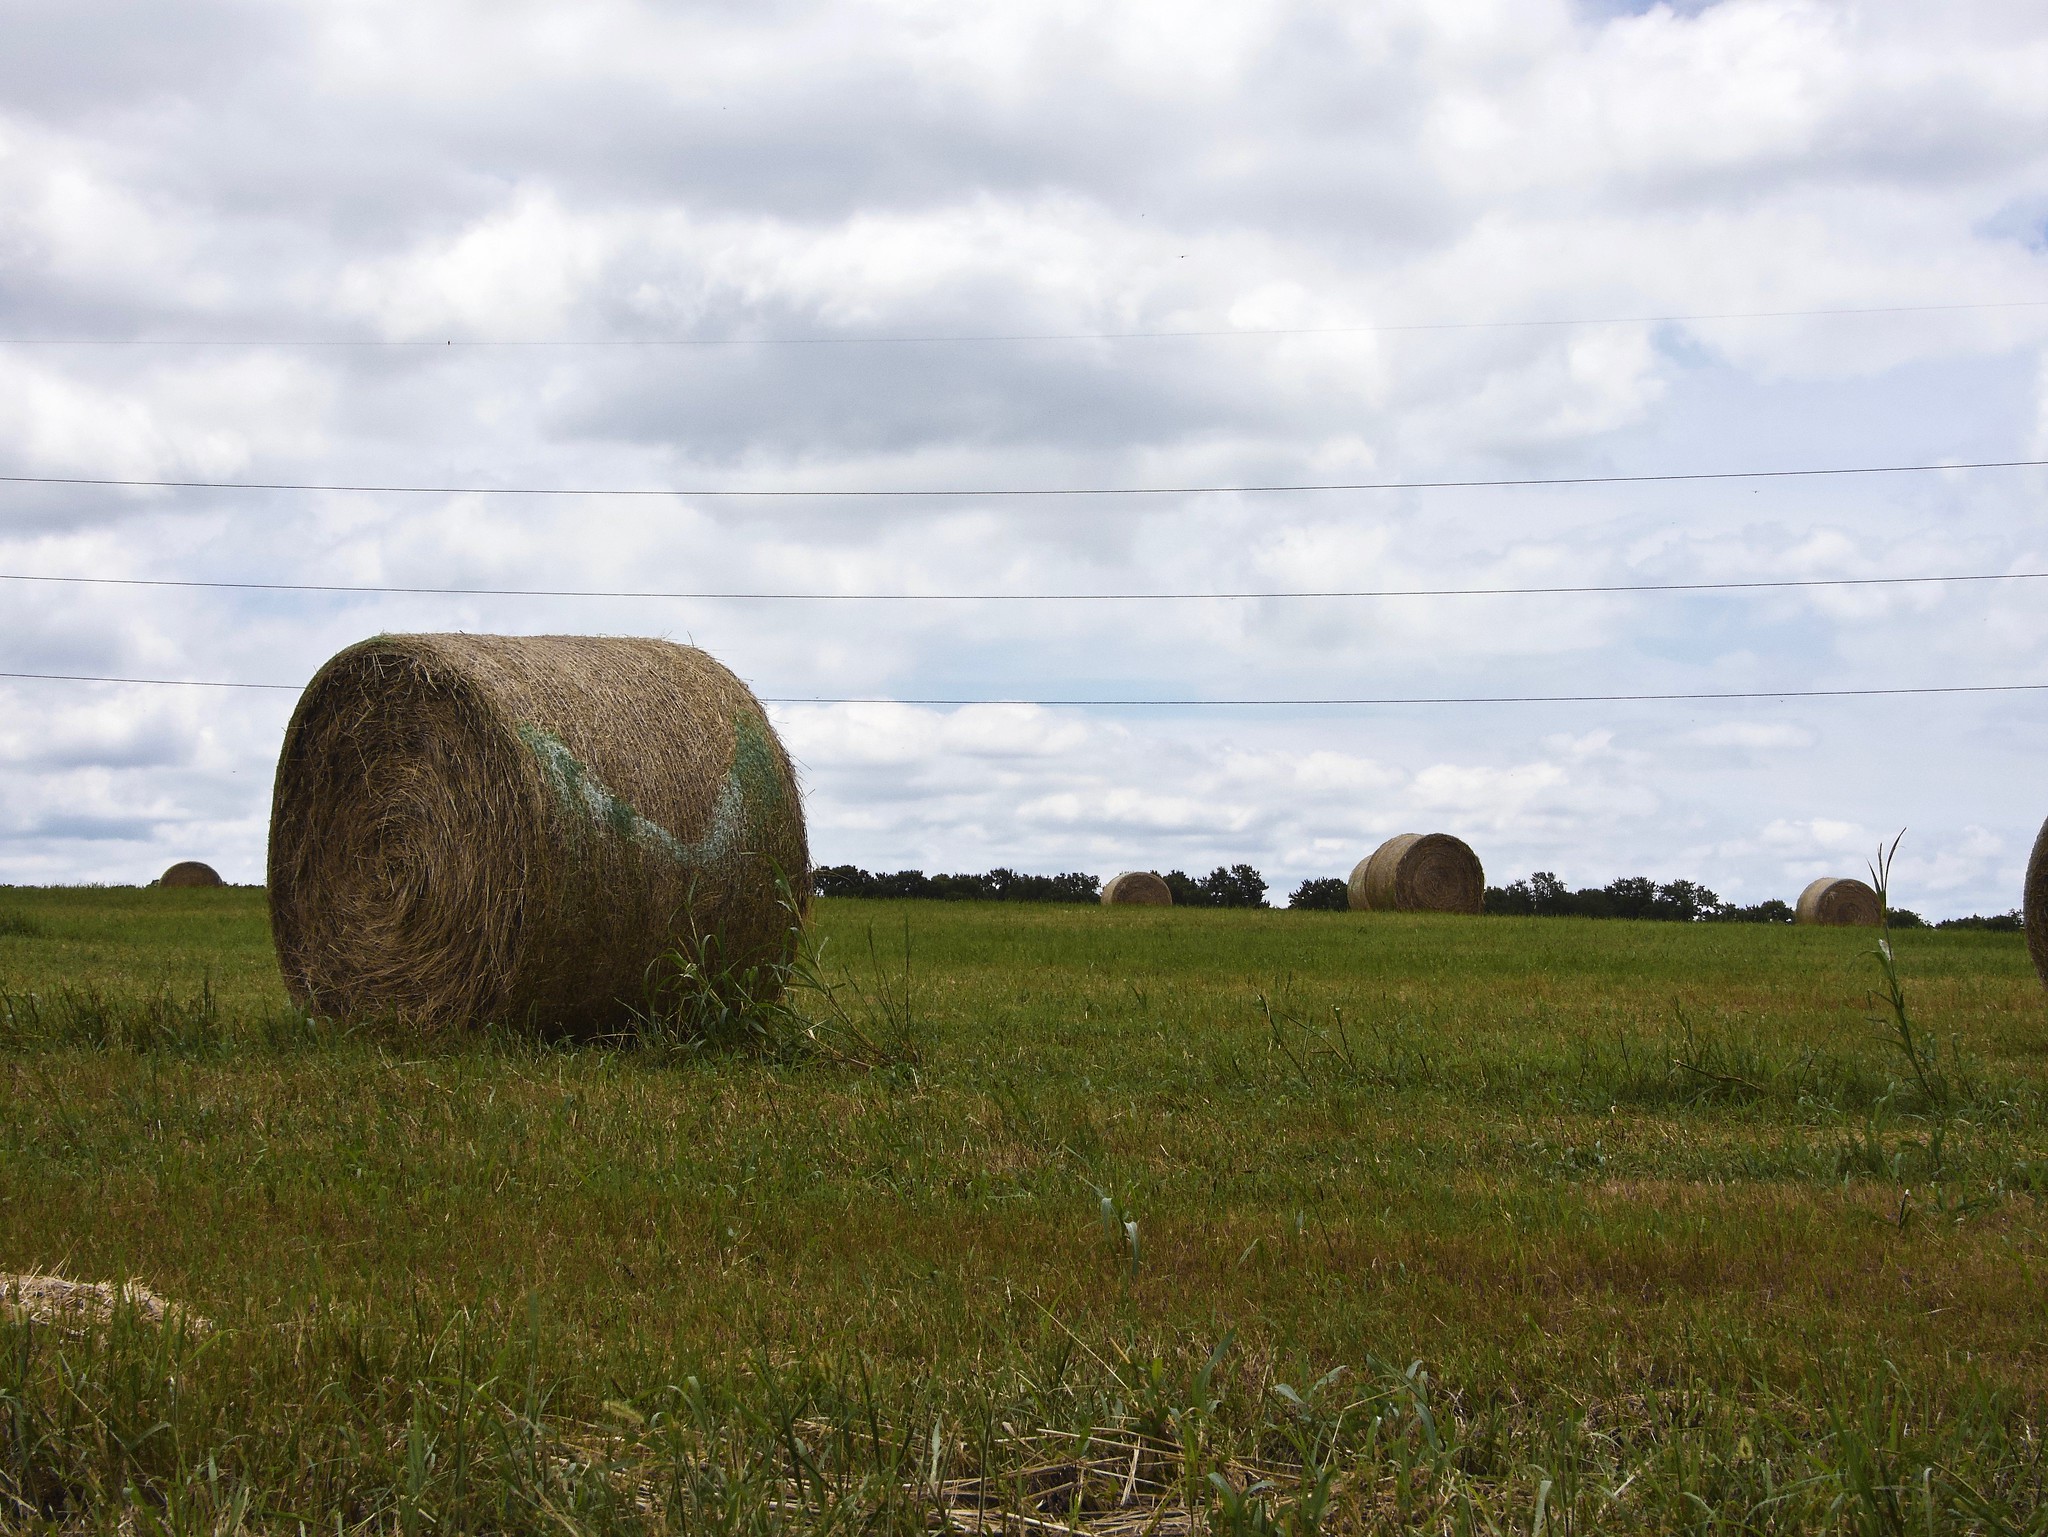 A Bale of Hay